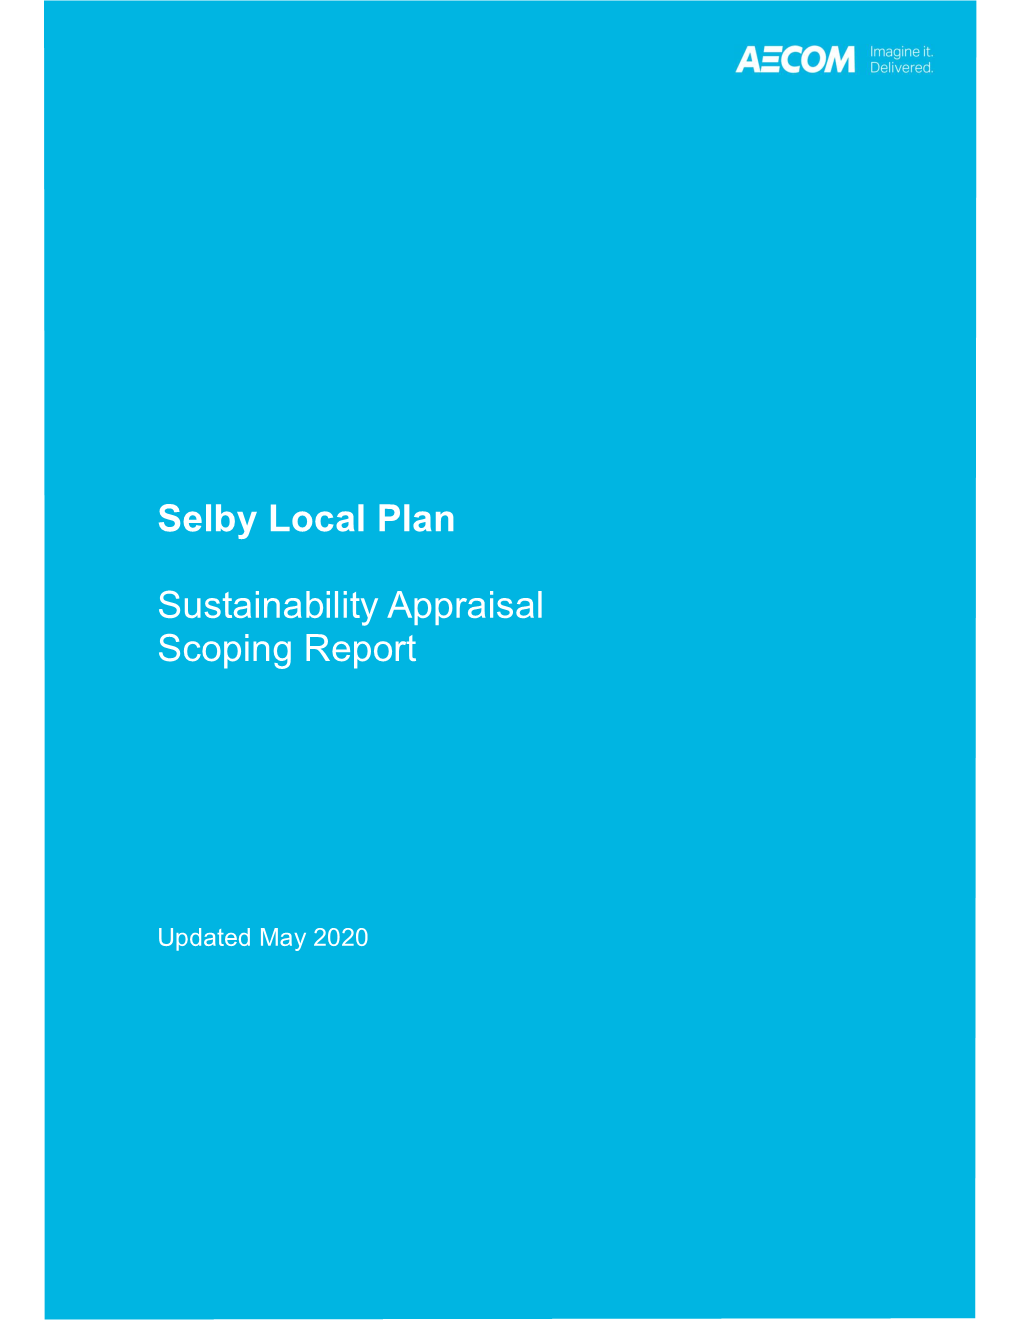 Selby Local Plan Sustainability Appraisal Scoping Report